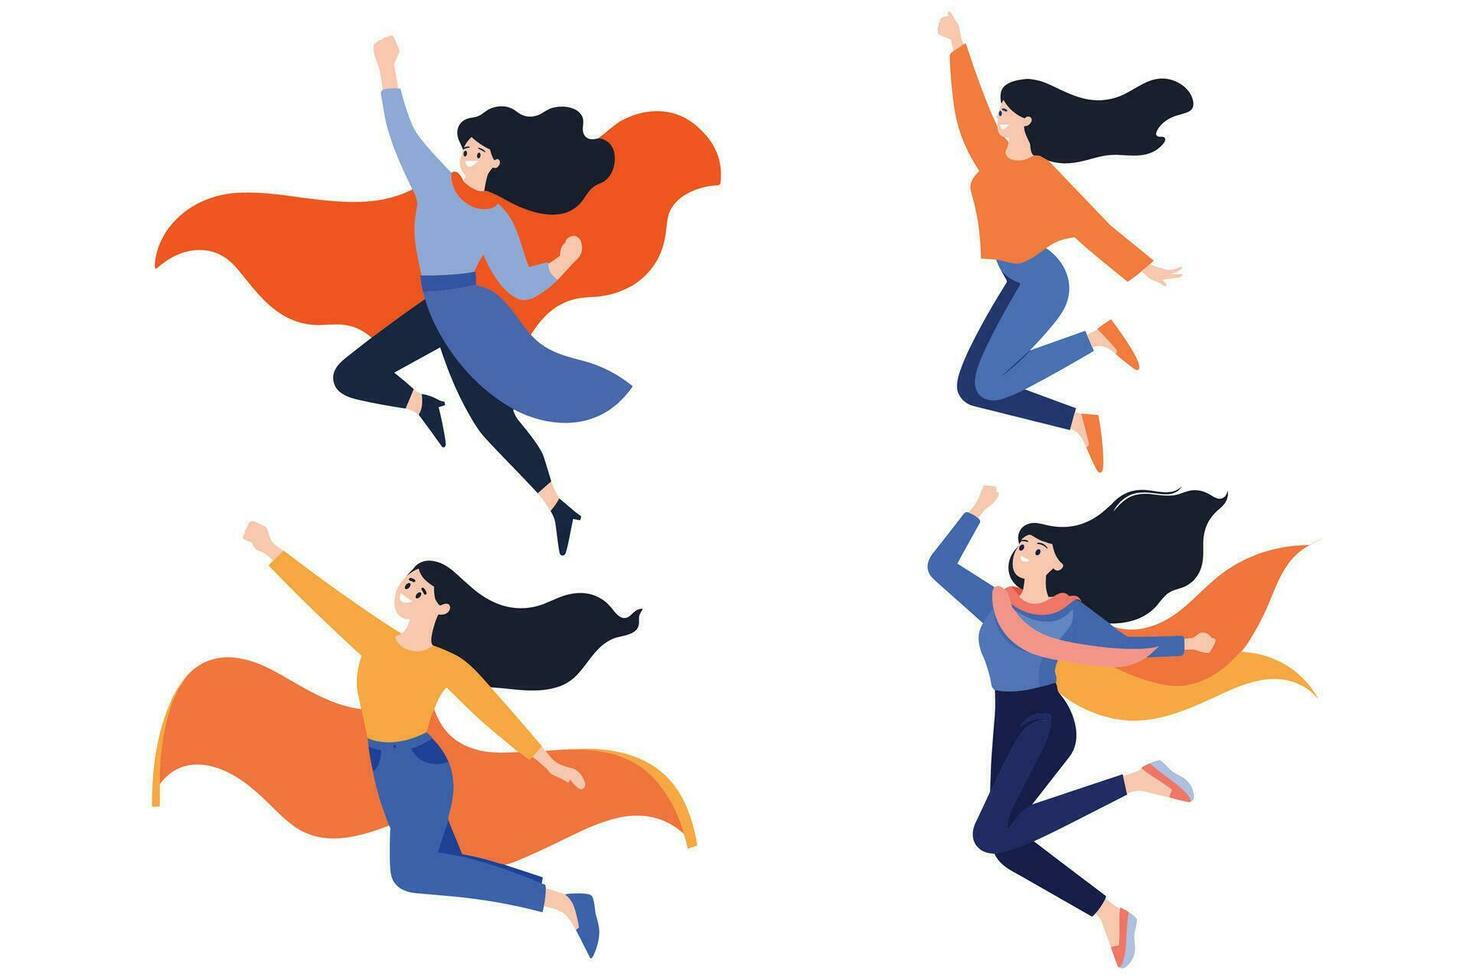 Hand Drawn Business woman with hero cape in flat style vector